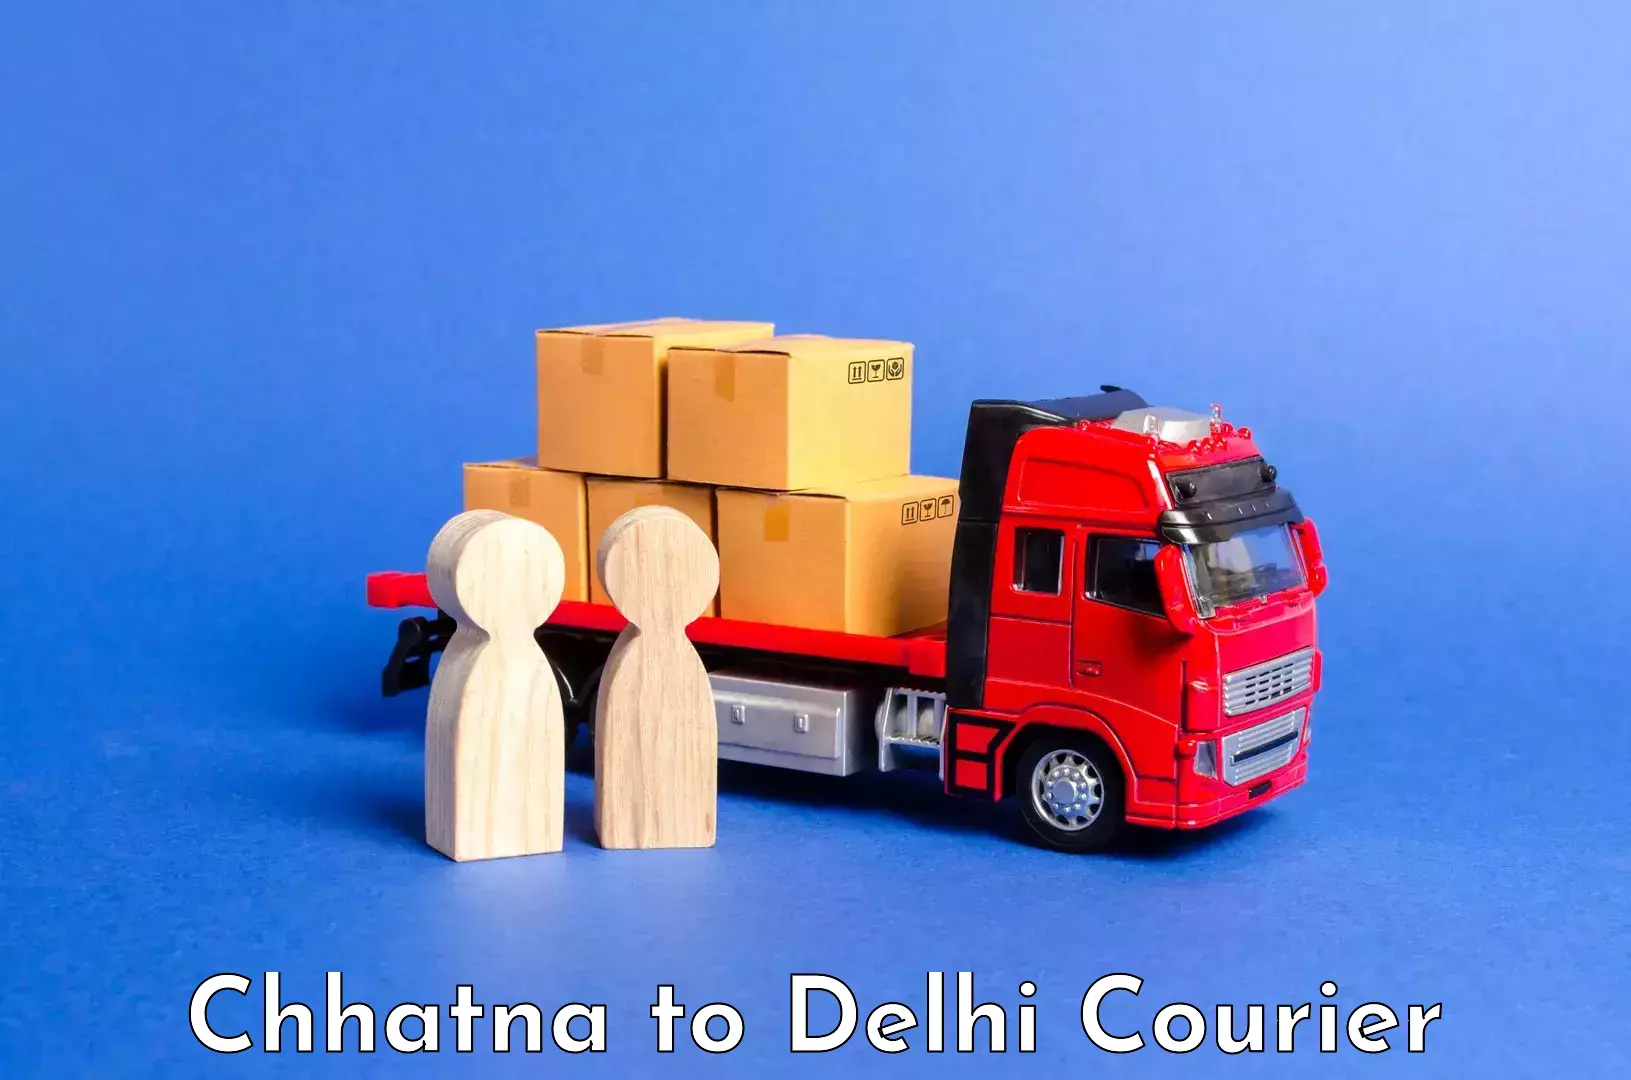 Luggage transport consultancy Chhatna to NCR